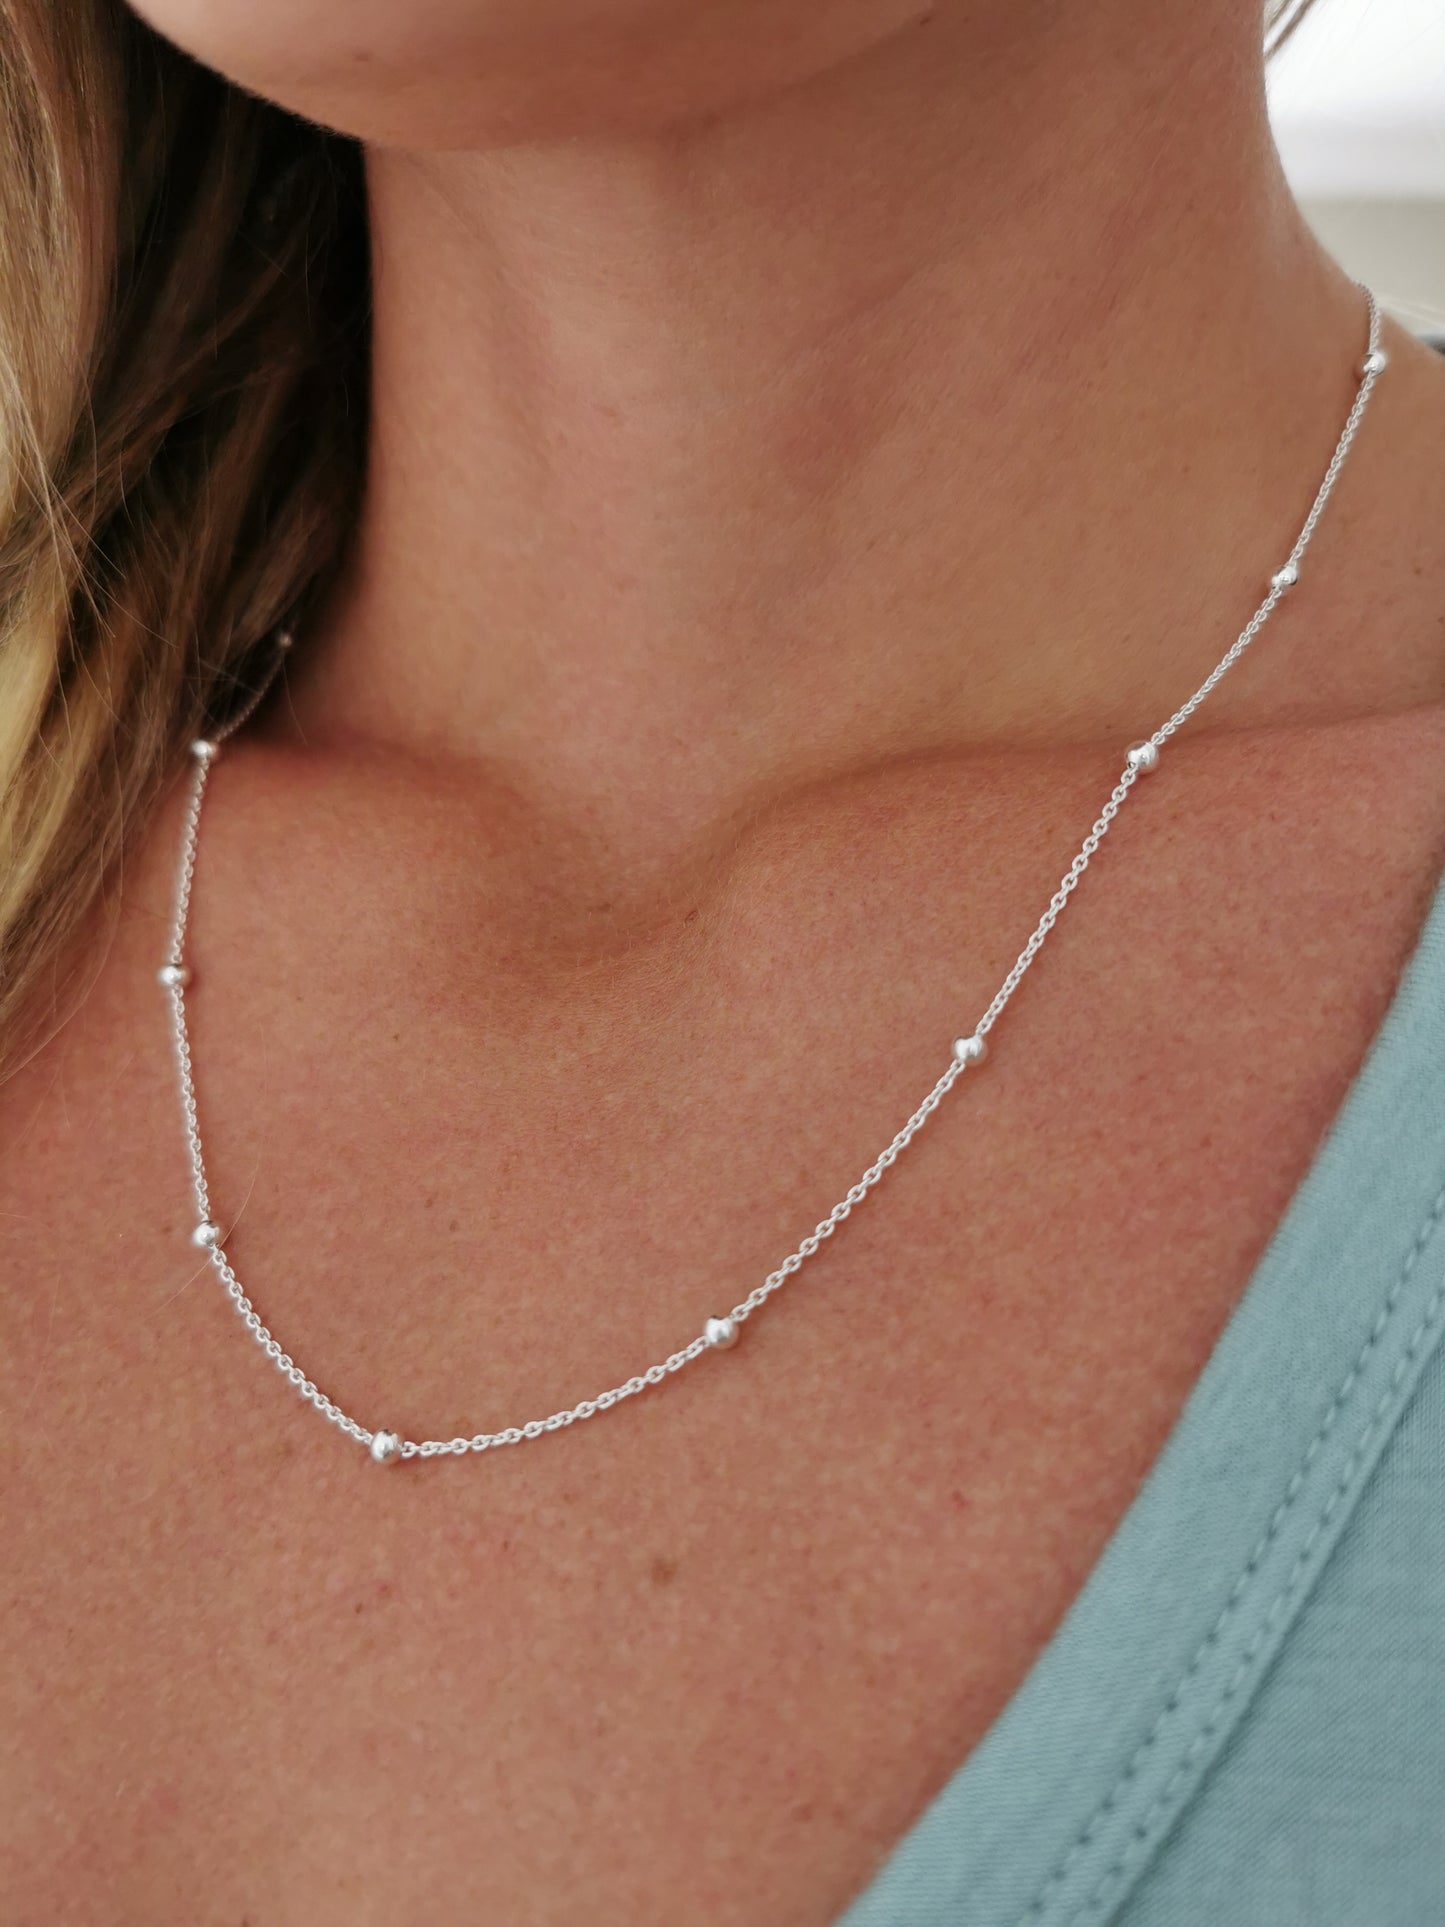 Dainty Silver Beaded Necklace